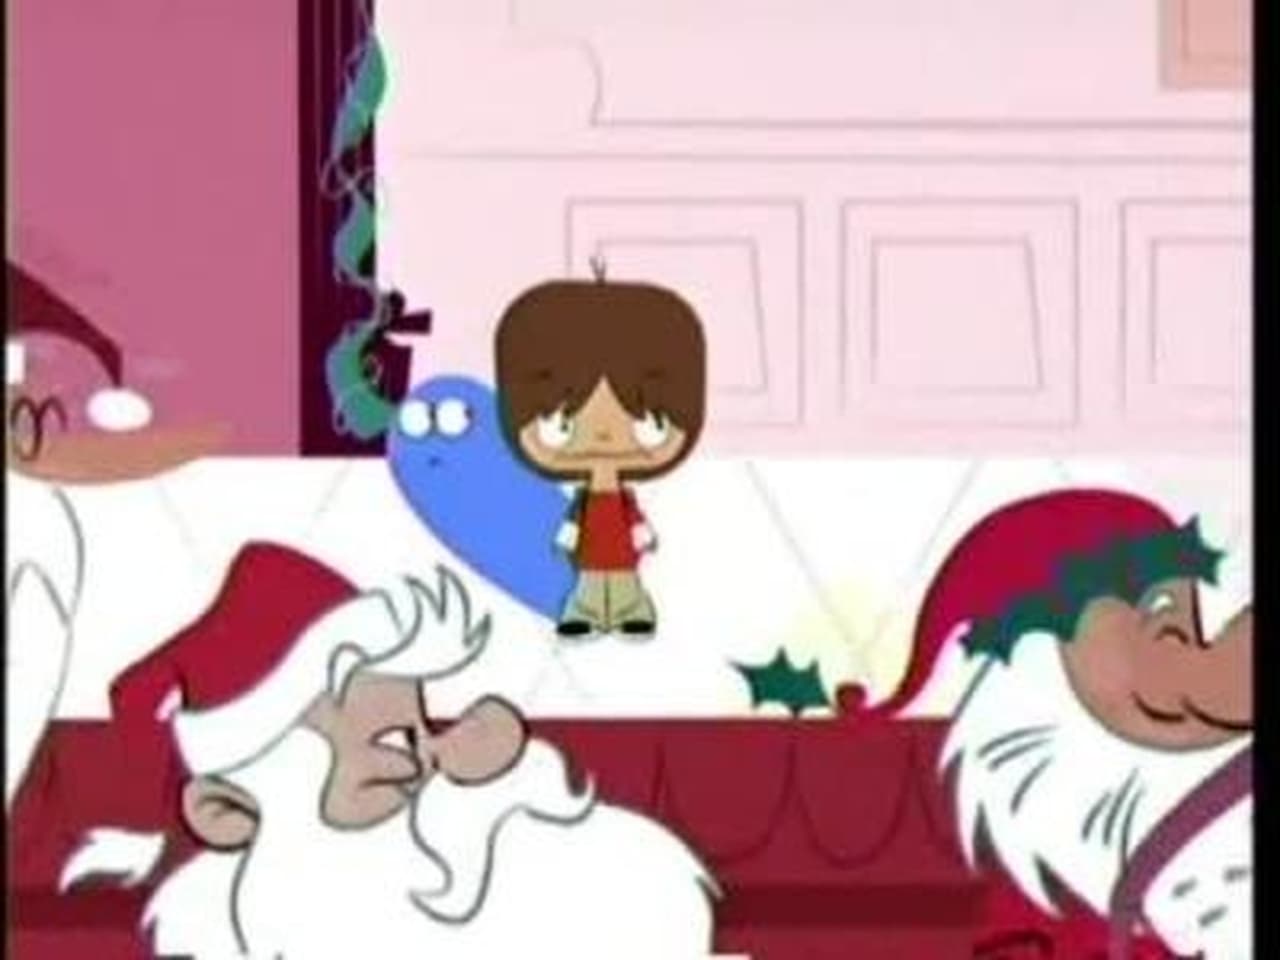 Foster's Home for Imaginary Friends - Season 3 Episode 10 : A Lost Claus